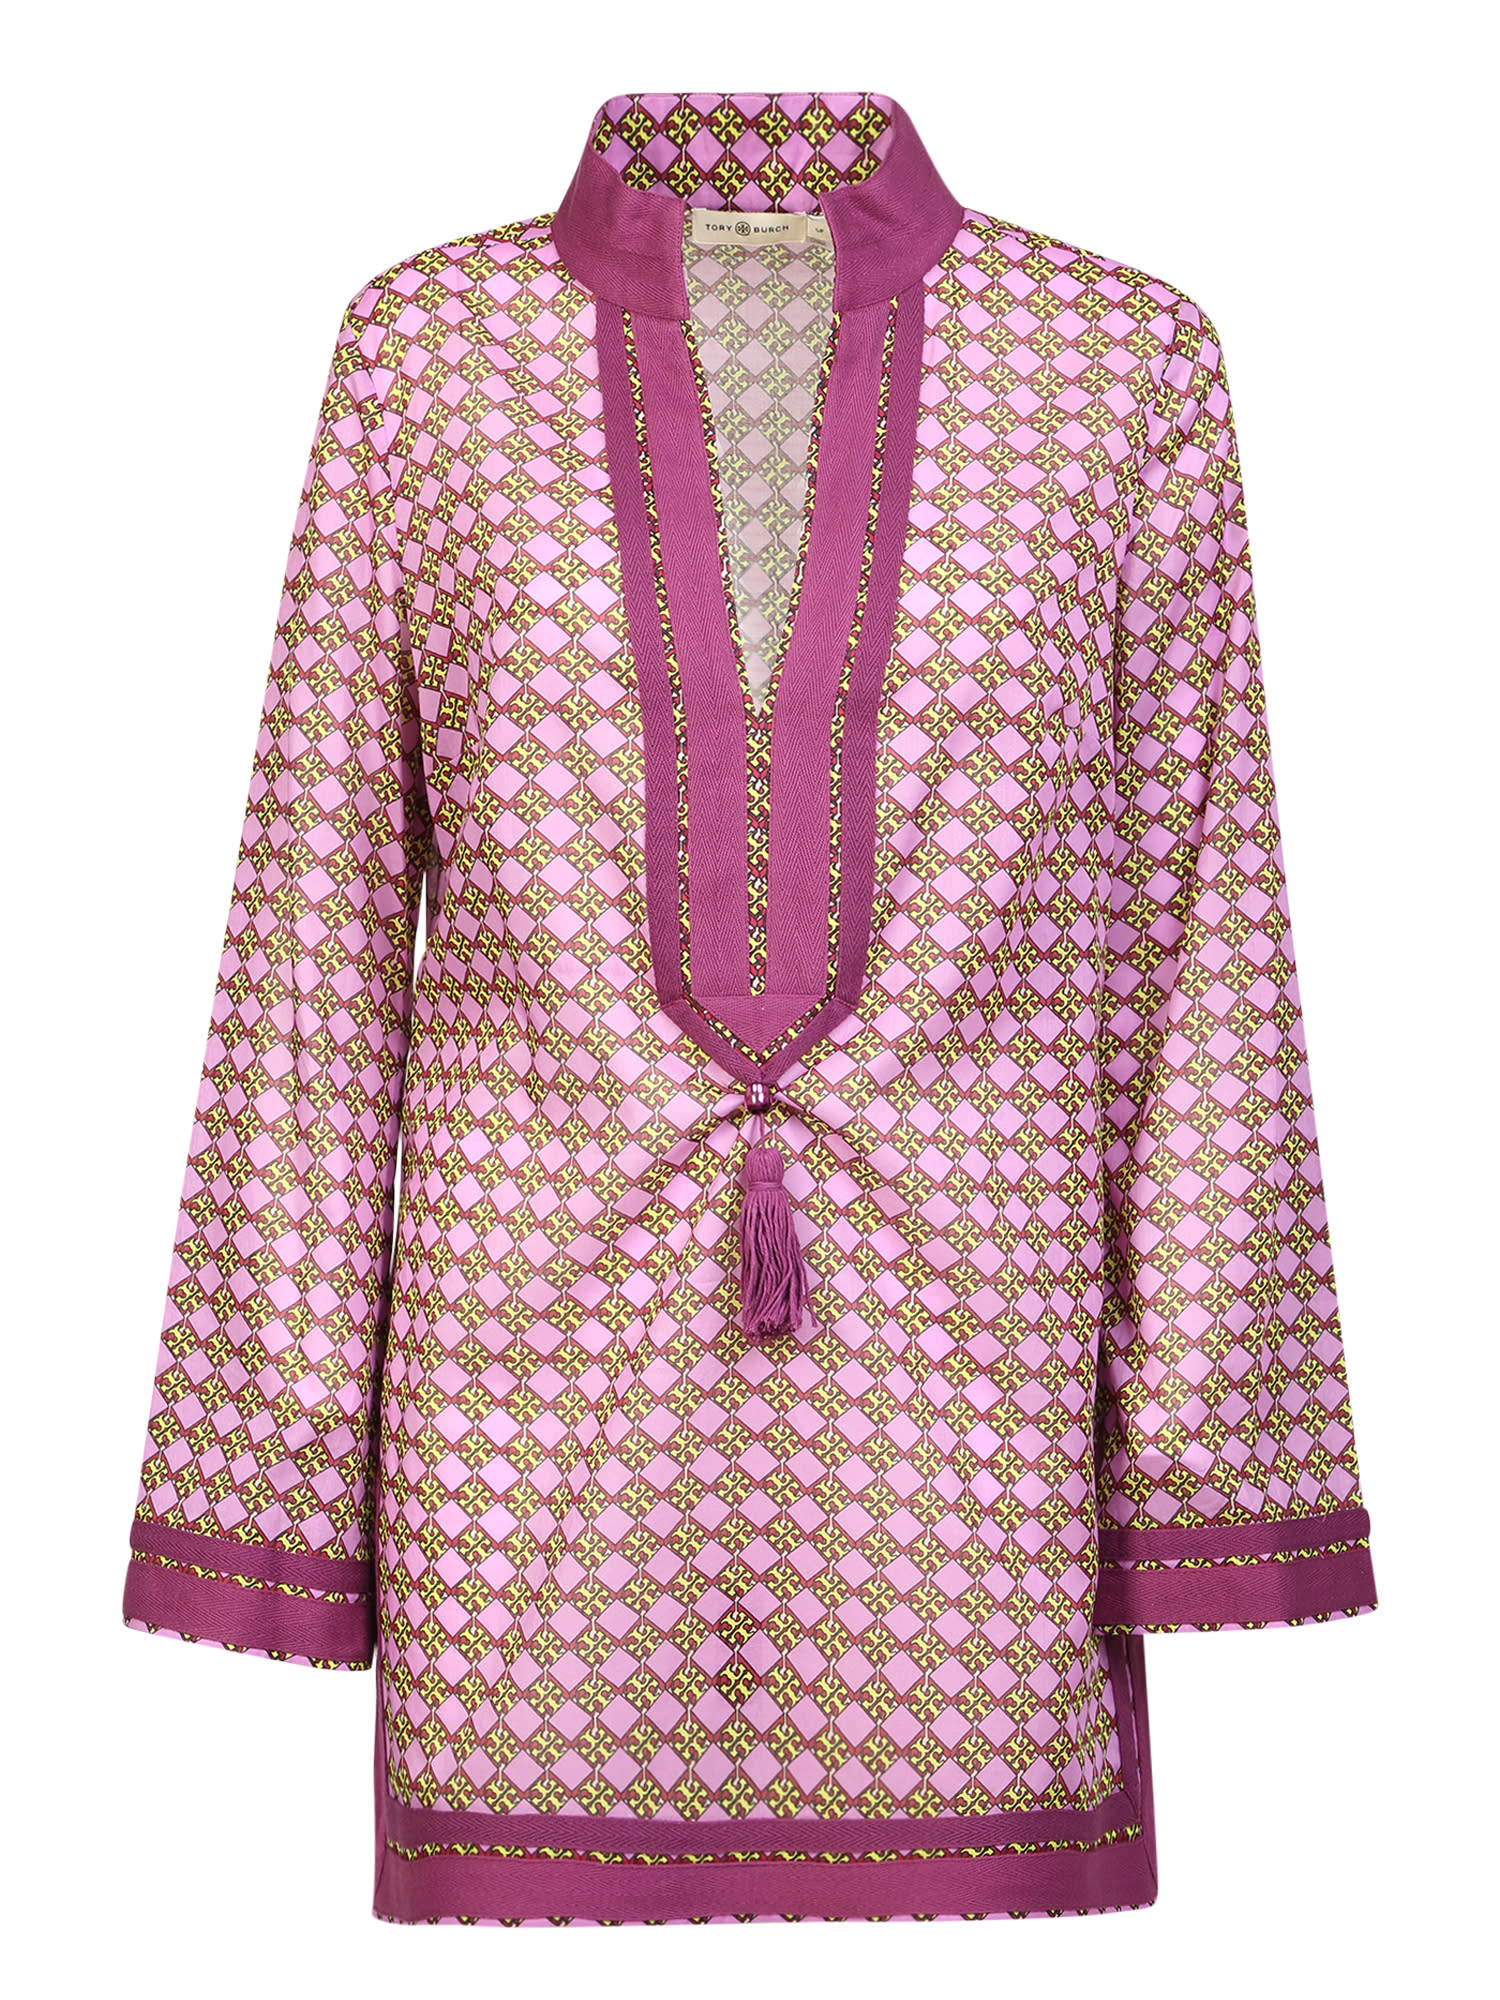 Tory Burch Geometric Print Tunic By. Made Following A Comfortable Style Without Losing Attention To Aesthetics